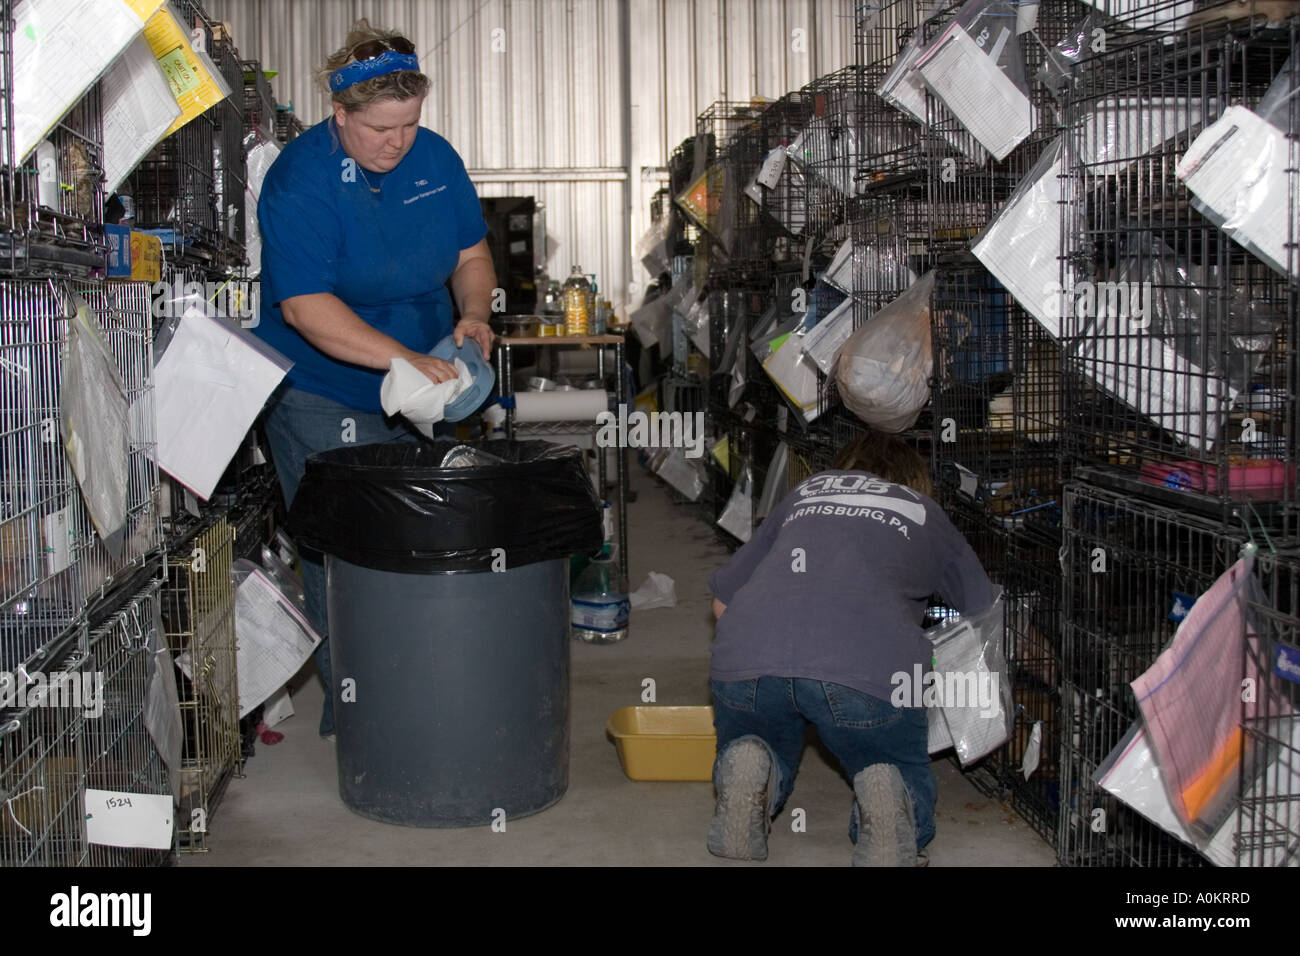 Volunteers clean cages in an emergency animal shelter run by Noah s Wish in Slidell Louisiana after Hurricane Katrina Stock Photo